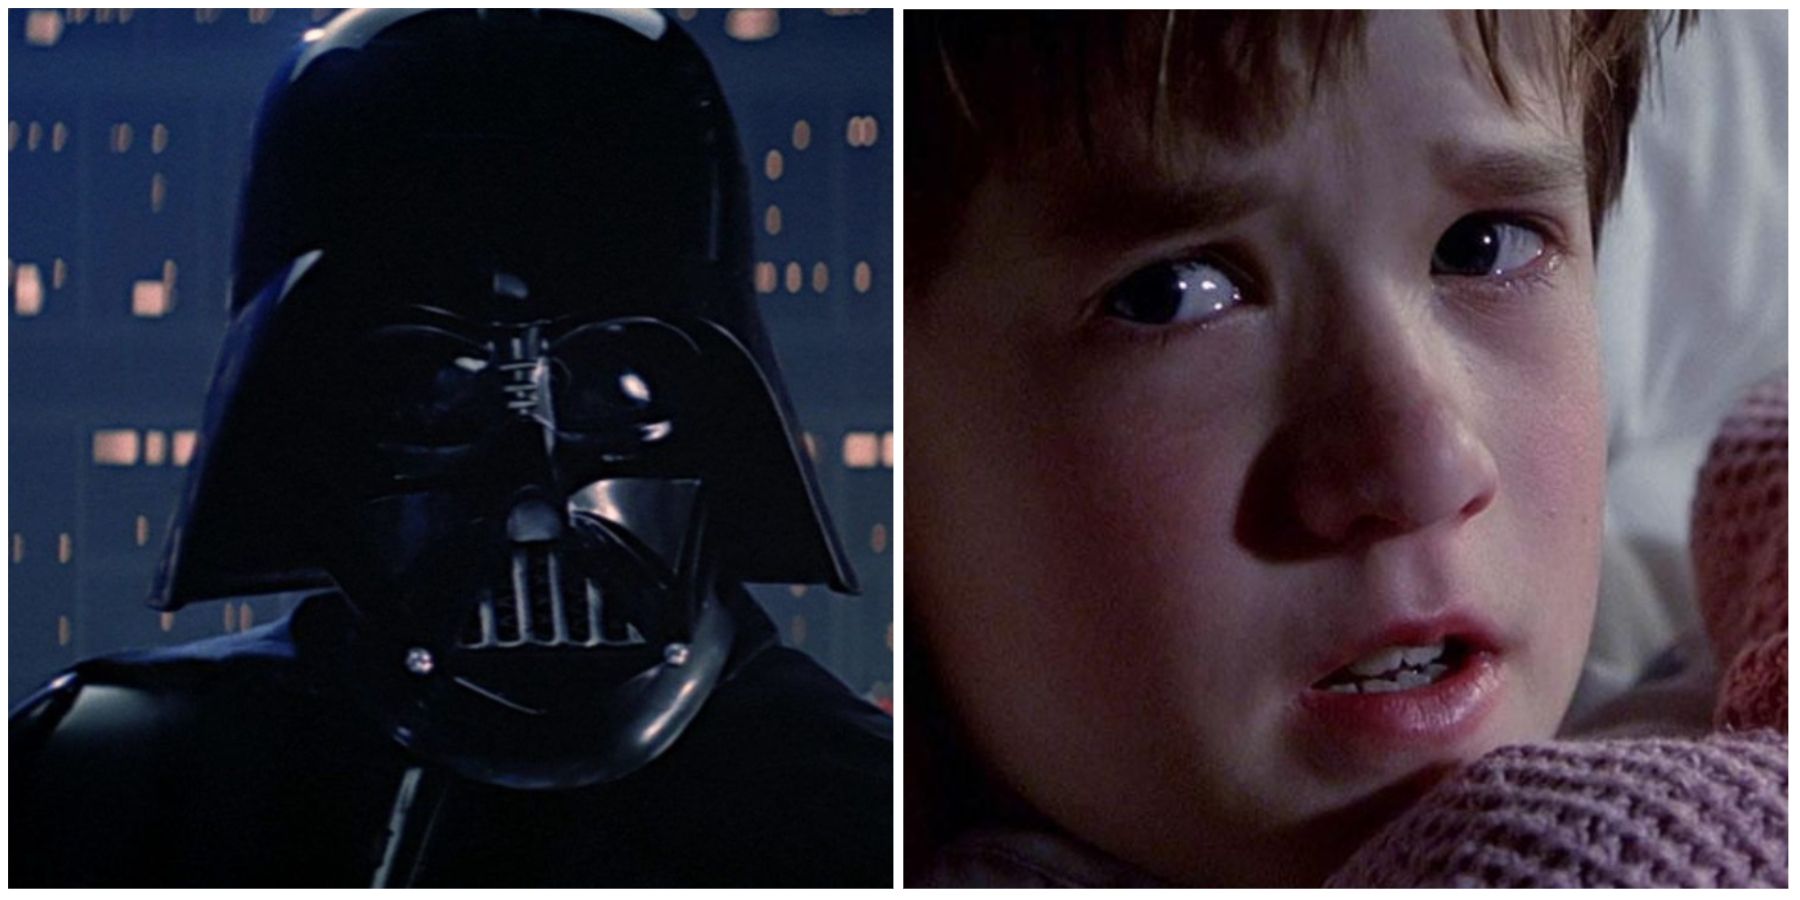 Darth Vader from Star Wars and the kid from The Sixth Sense